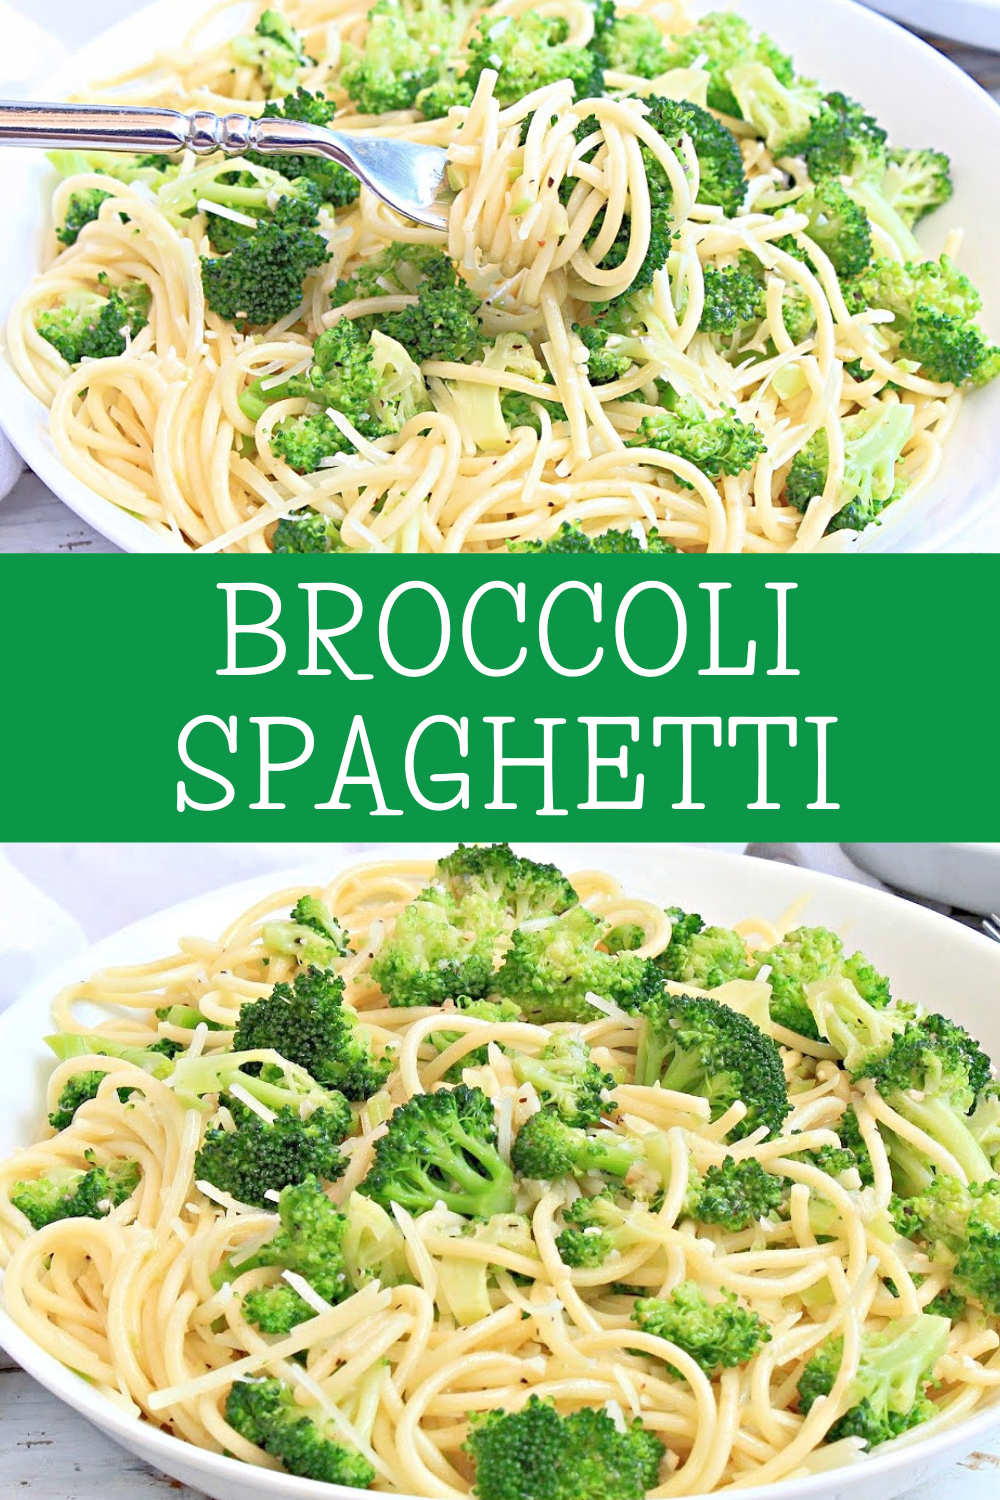 Broccoli Spaghetti Aglio e Olio ~ Fresh broccoli tossed with garlic and olive oil pasta is easy to make with simple ingredients! via @thiswifecooks